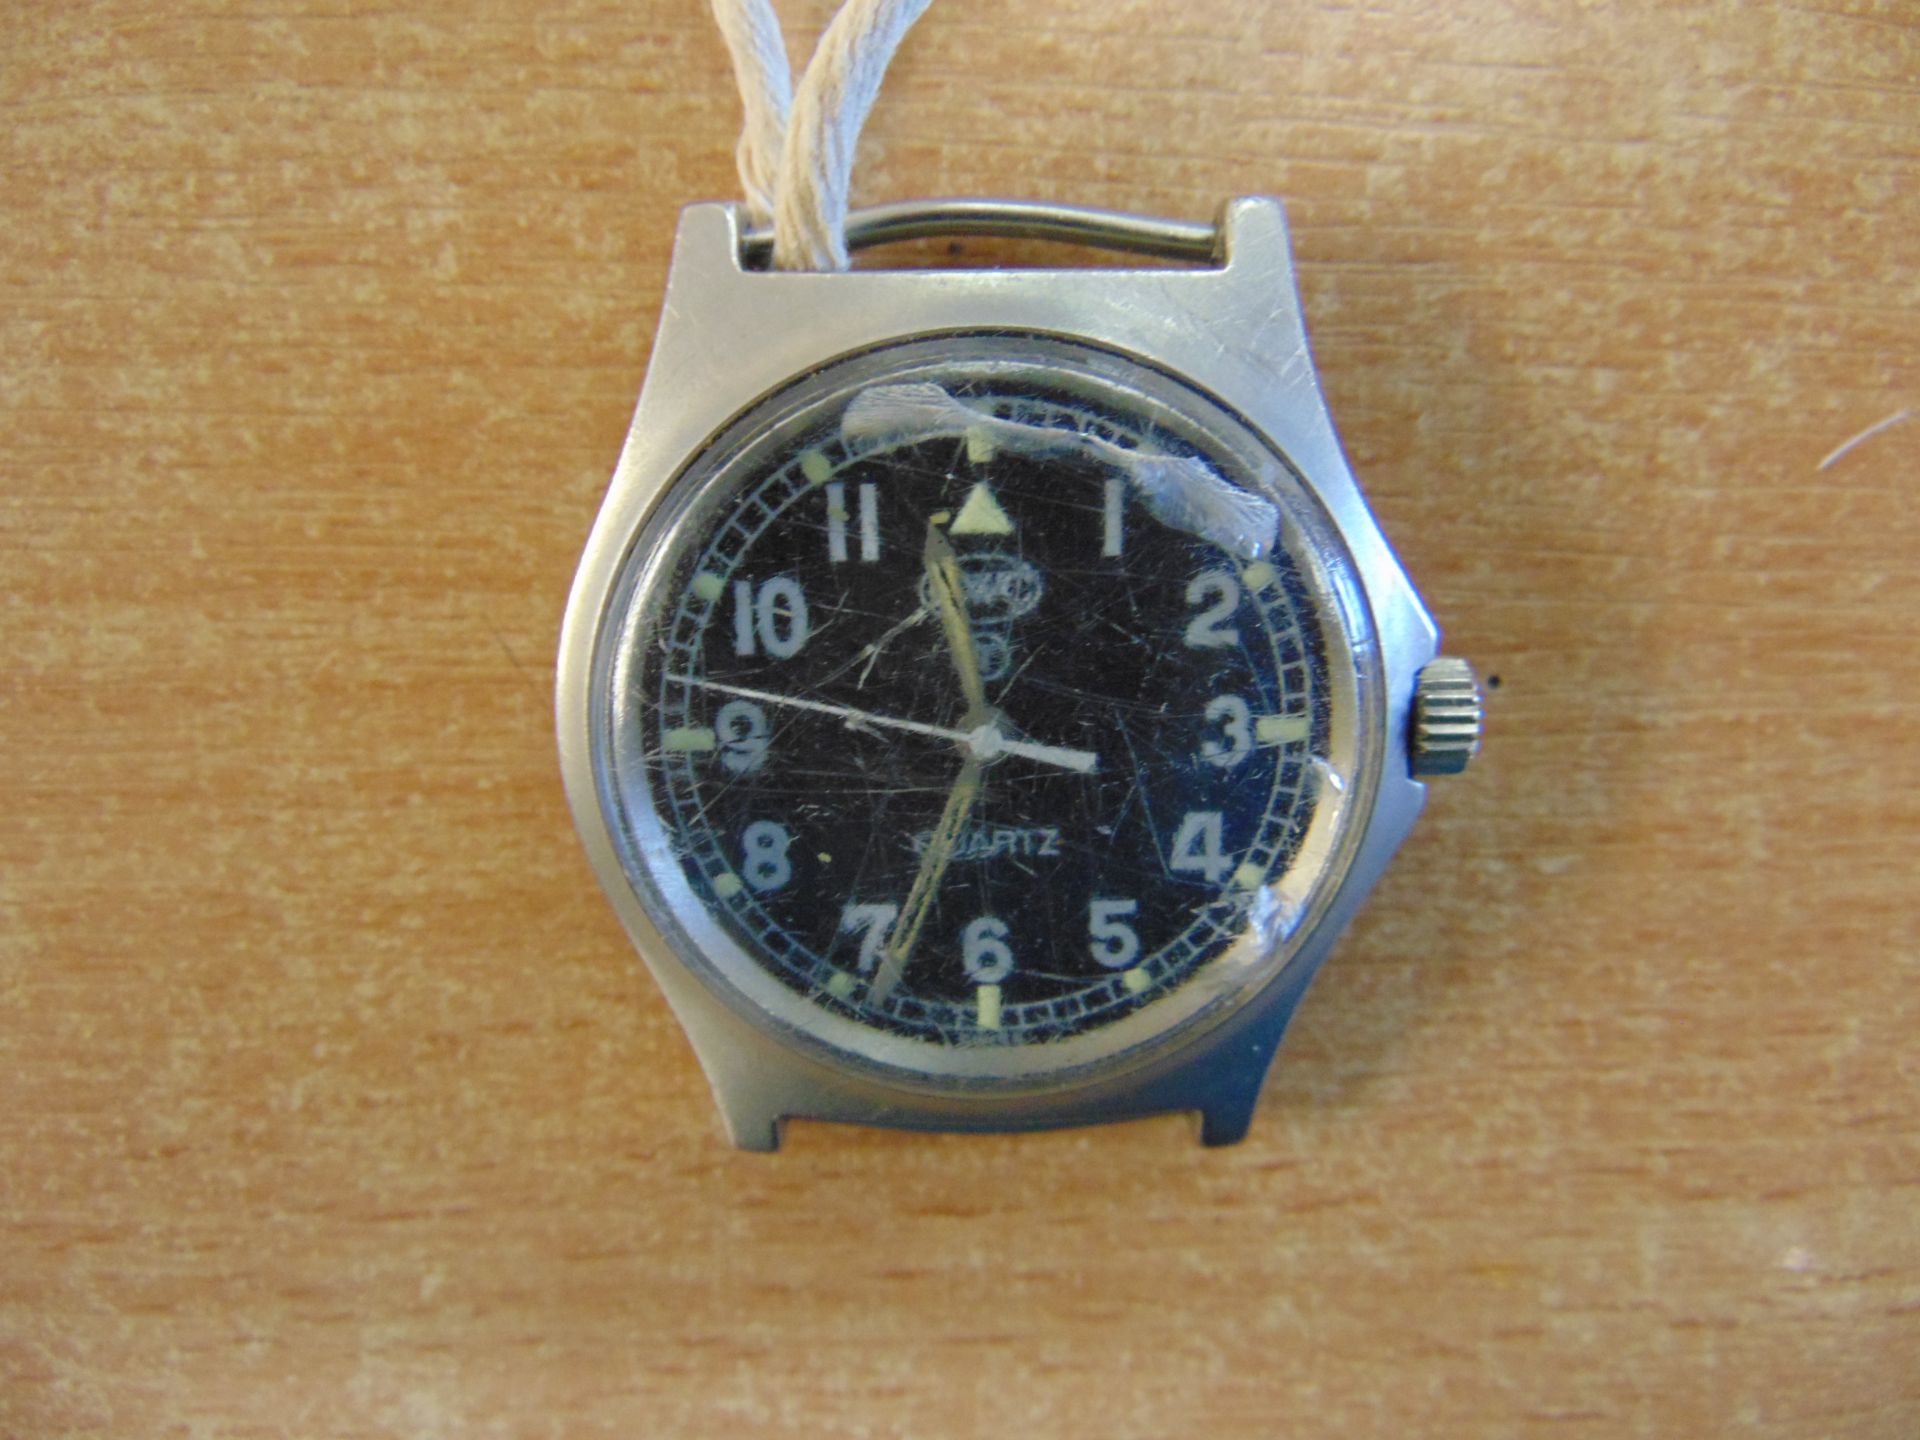 CWC 0552 NAVY/ ROYAL MARINES ISSUE SERVICE WATCH NATO MARKS DATE 1988- GLASS CRACKED - Image 2 of 6